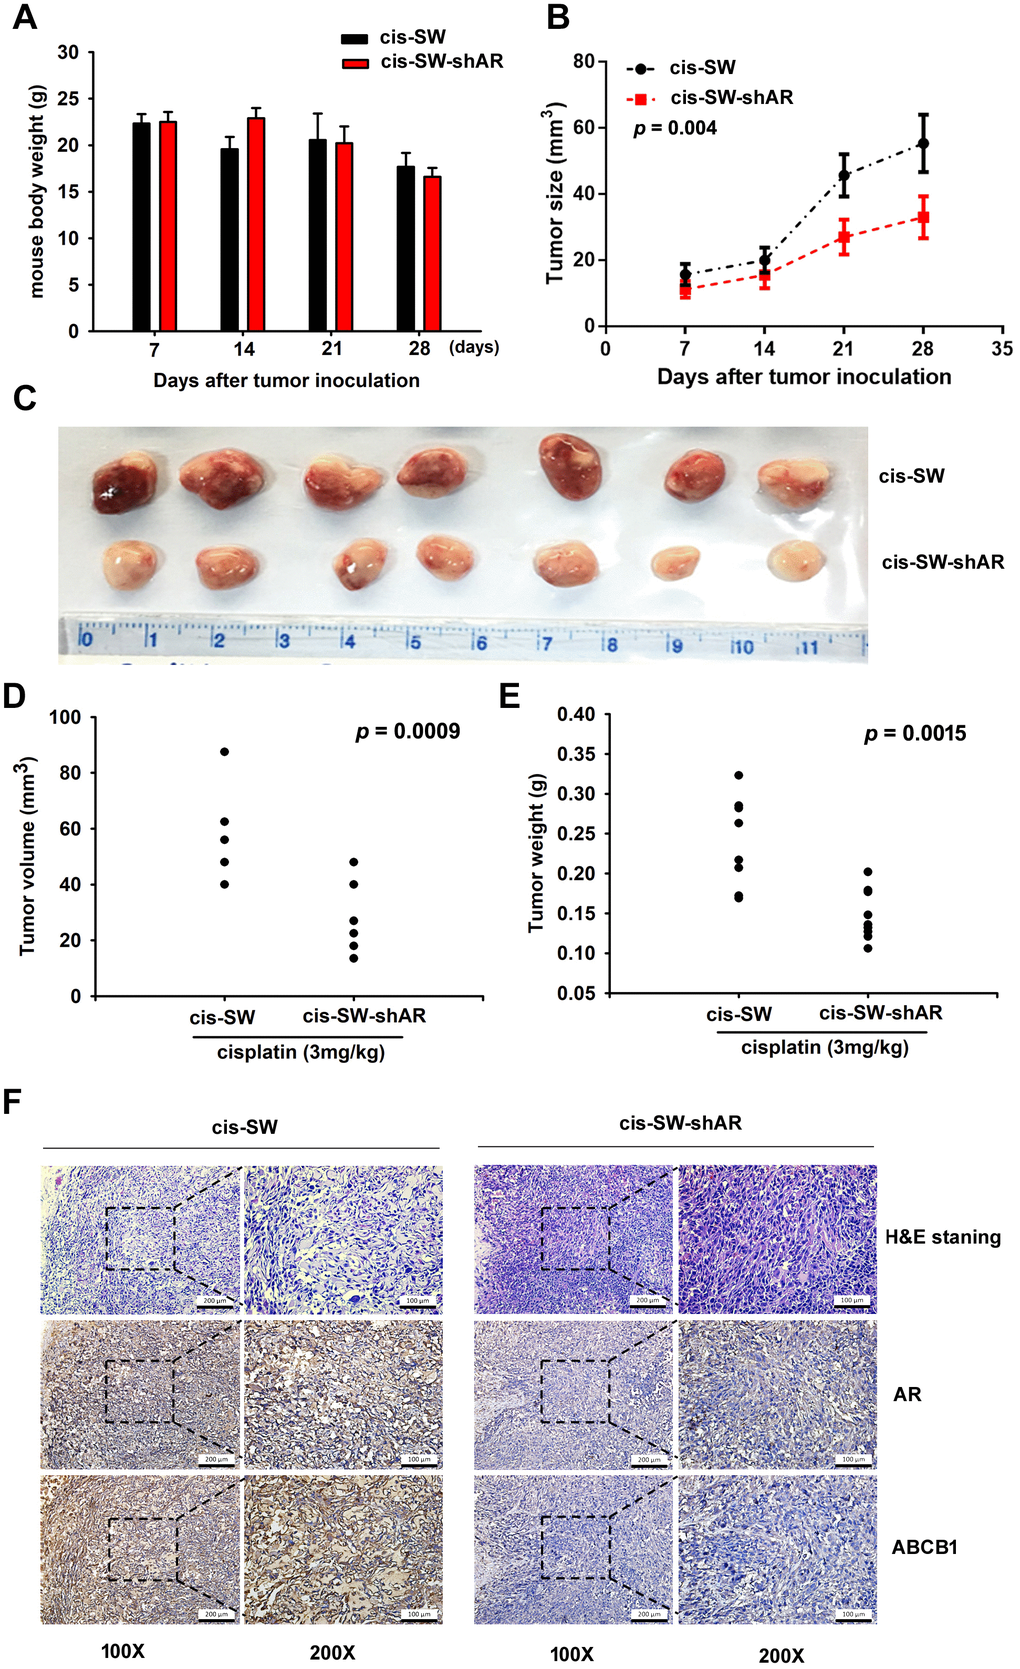 Inhibiting amphiregulin expression suppresses resistance to cisplatin in a nude mouse xenograft model. (A) Body weights are shown for mice treated with cisplatin for 28 days. (B) Tumor growth curves of chondrosarcoma cells treated with cisplatin over 28 days. (C) Representative photomicrographs of cis-SW and cis-SW-shAR cells from nude mice. (D, E) Tumor volumes and weights were measured after the mice were sacrificed. (F) IHC staining detected AR and ABCB1 expression.